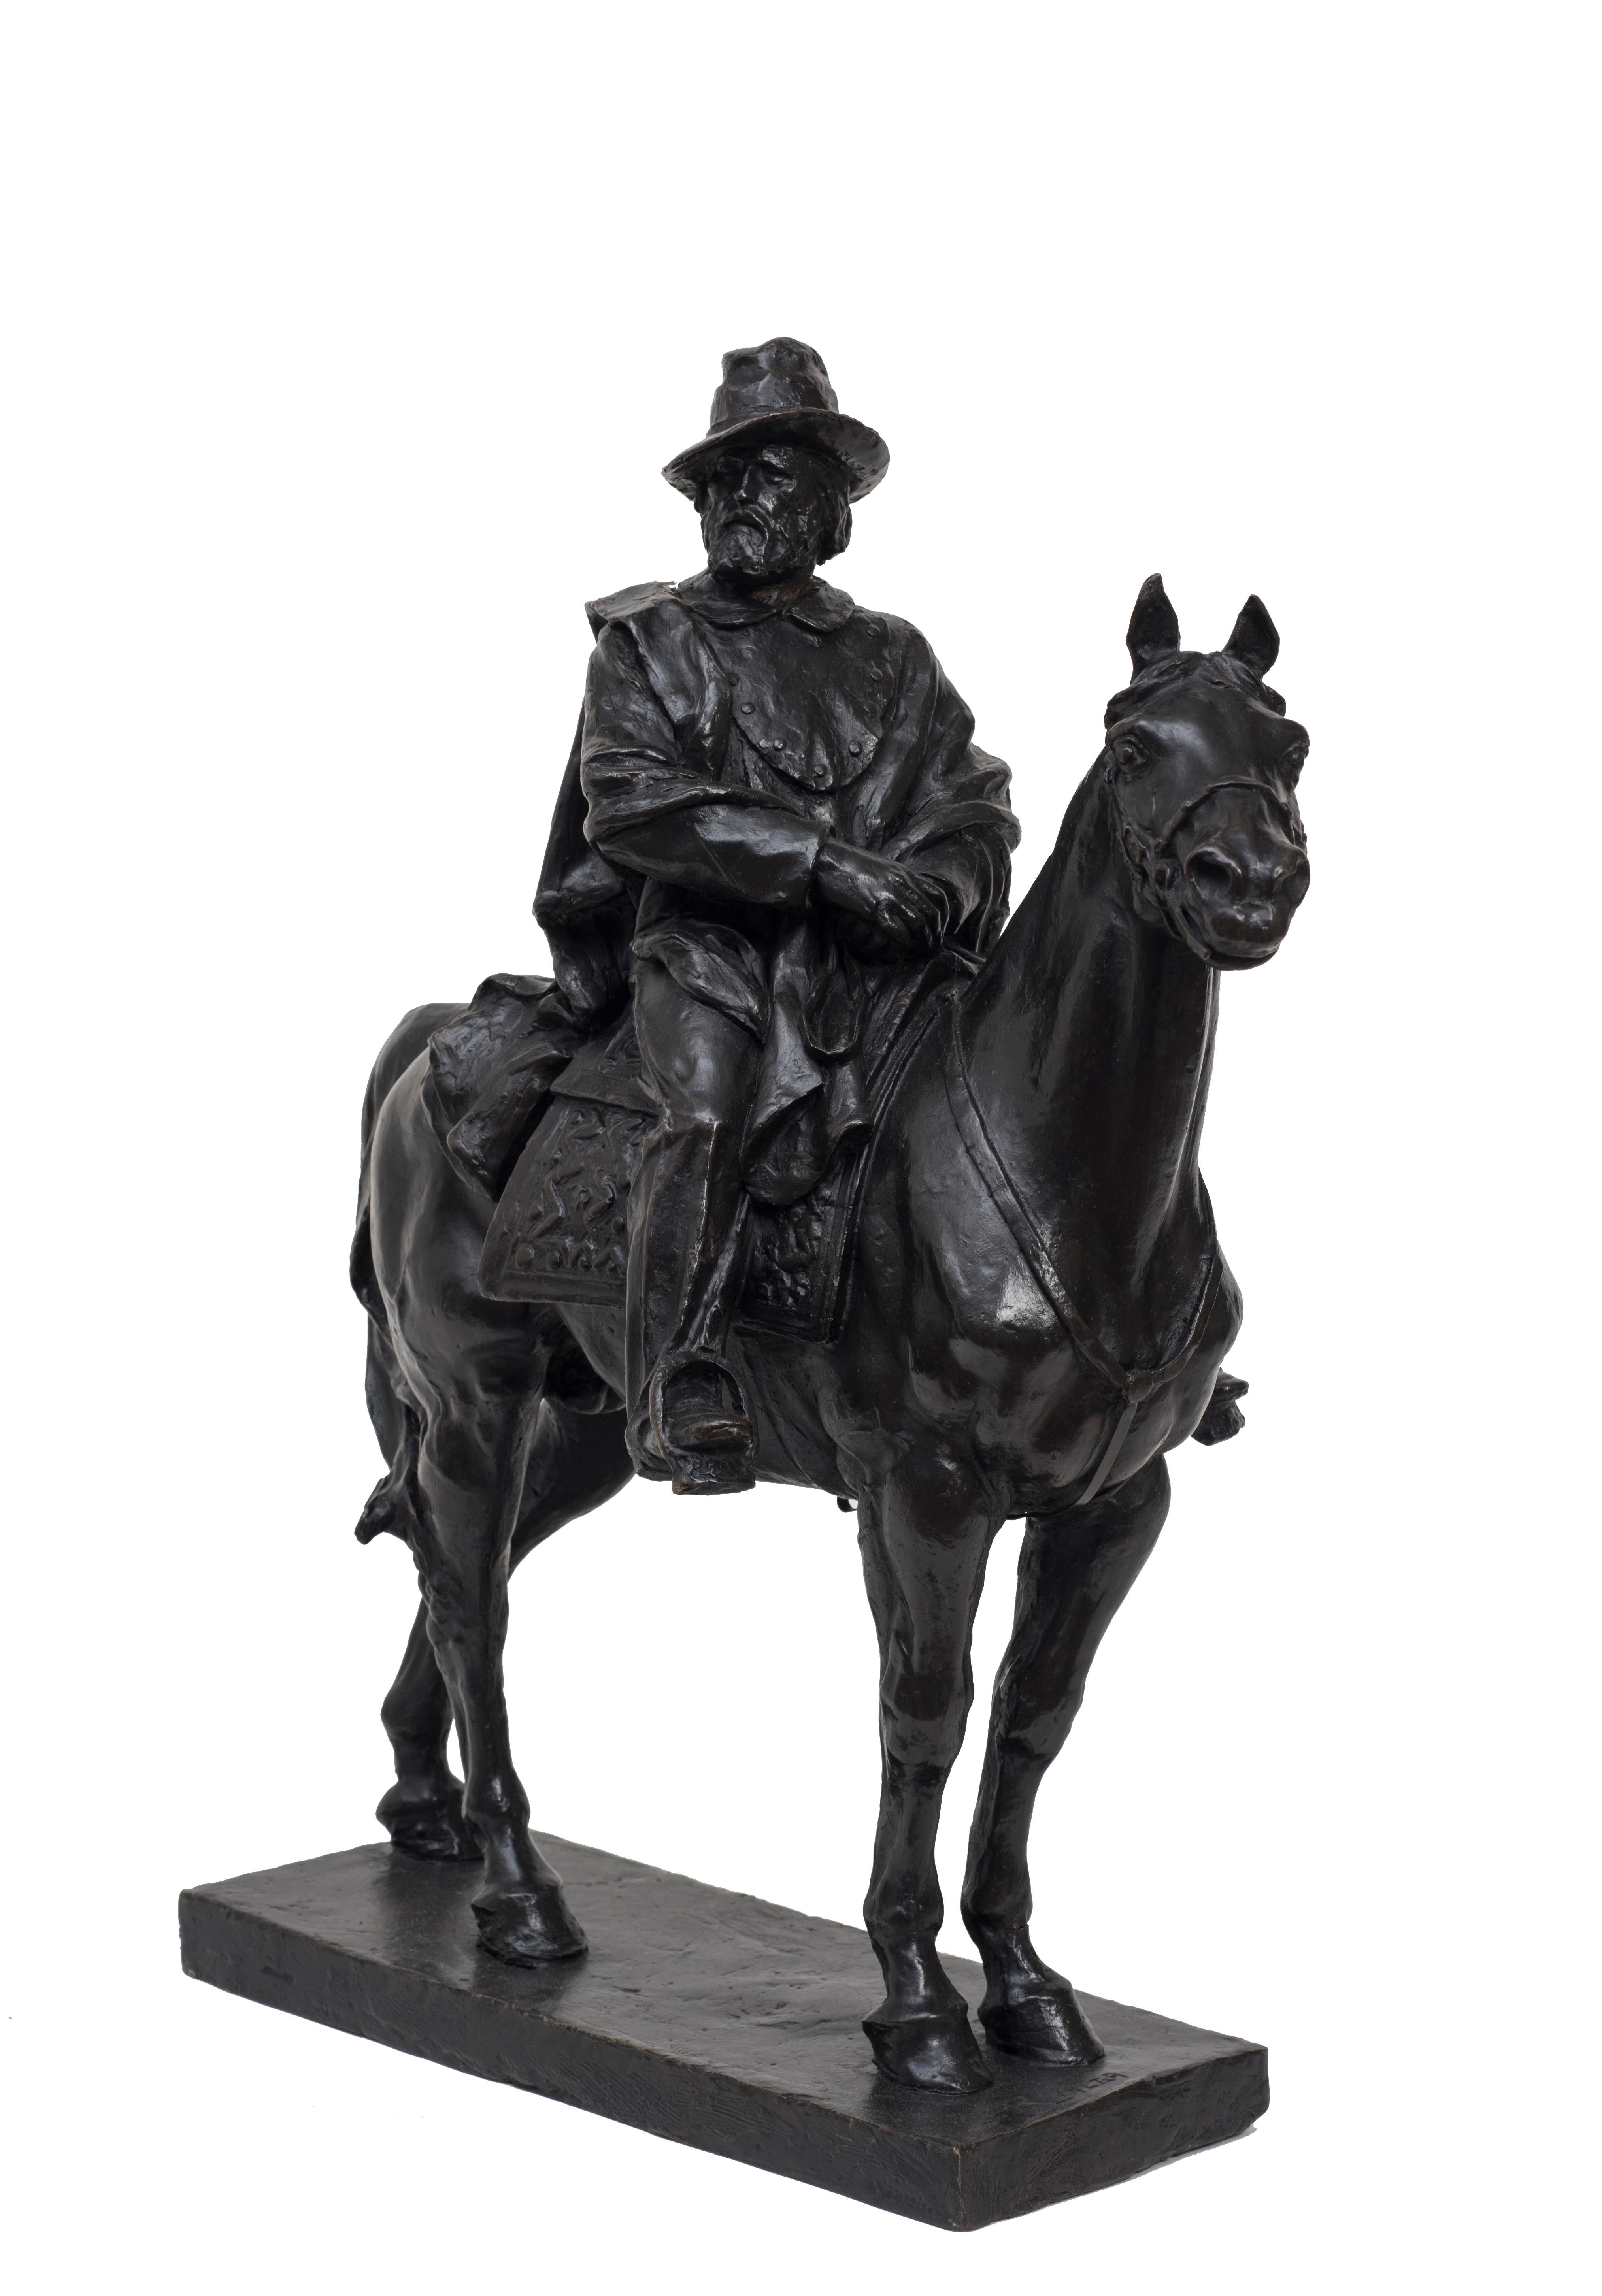 Garibaldi Riding A Horse is an original bronze sculpture realized by Carlo Rivalta. Signed by the artist.

Beautiful and important sculpture representing the most famous Italian Hero of the Risorgimento.

Excellent conditions.

Carlo Rivalta (1887 –